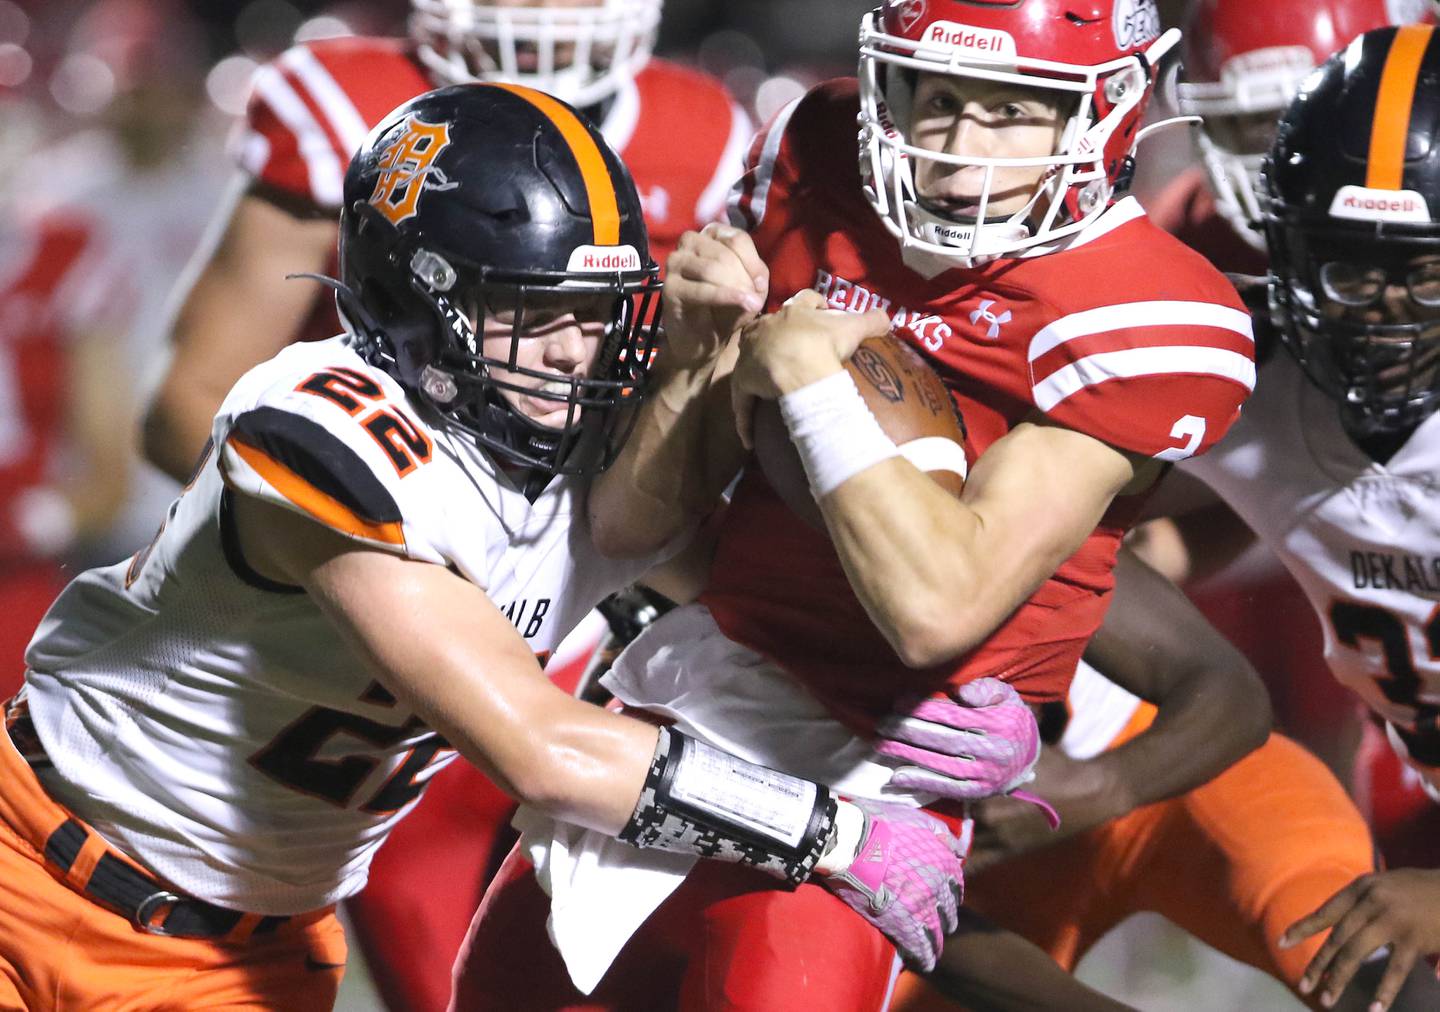 DeKalb linebacker Aiden Sisson brings down Naperville Central quarterback Owen Prucha during their game Friday, Oct. 8, 2021, at Naperville Central High School.